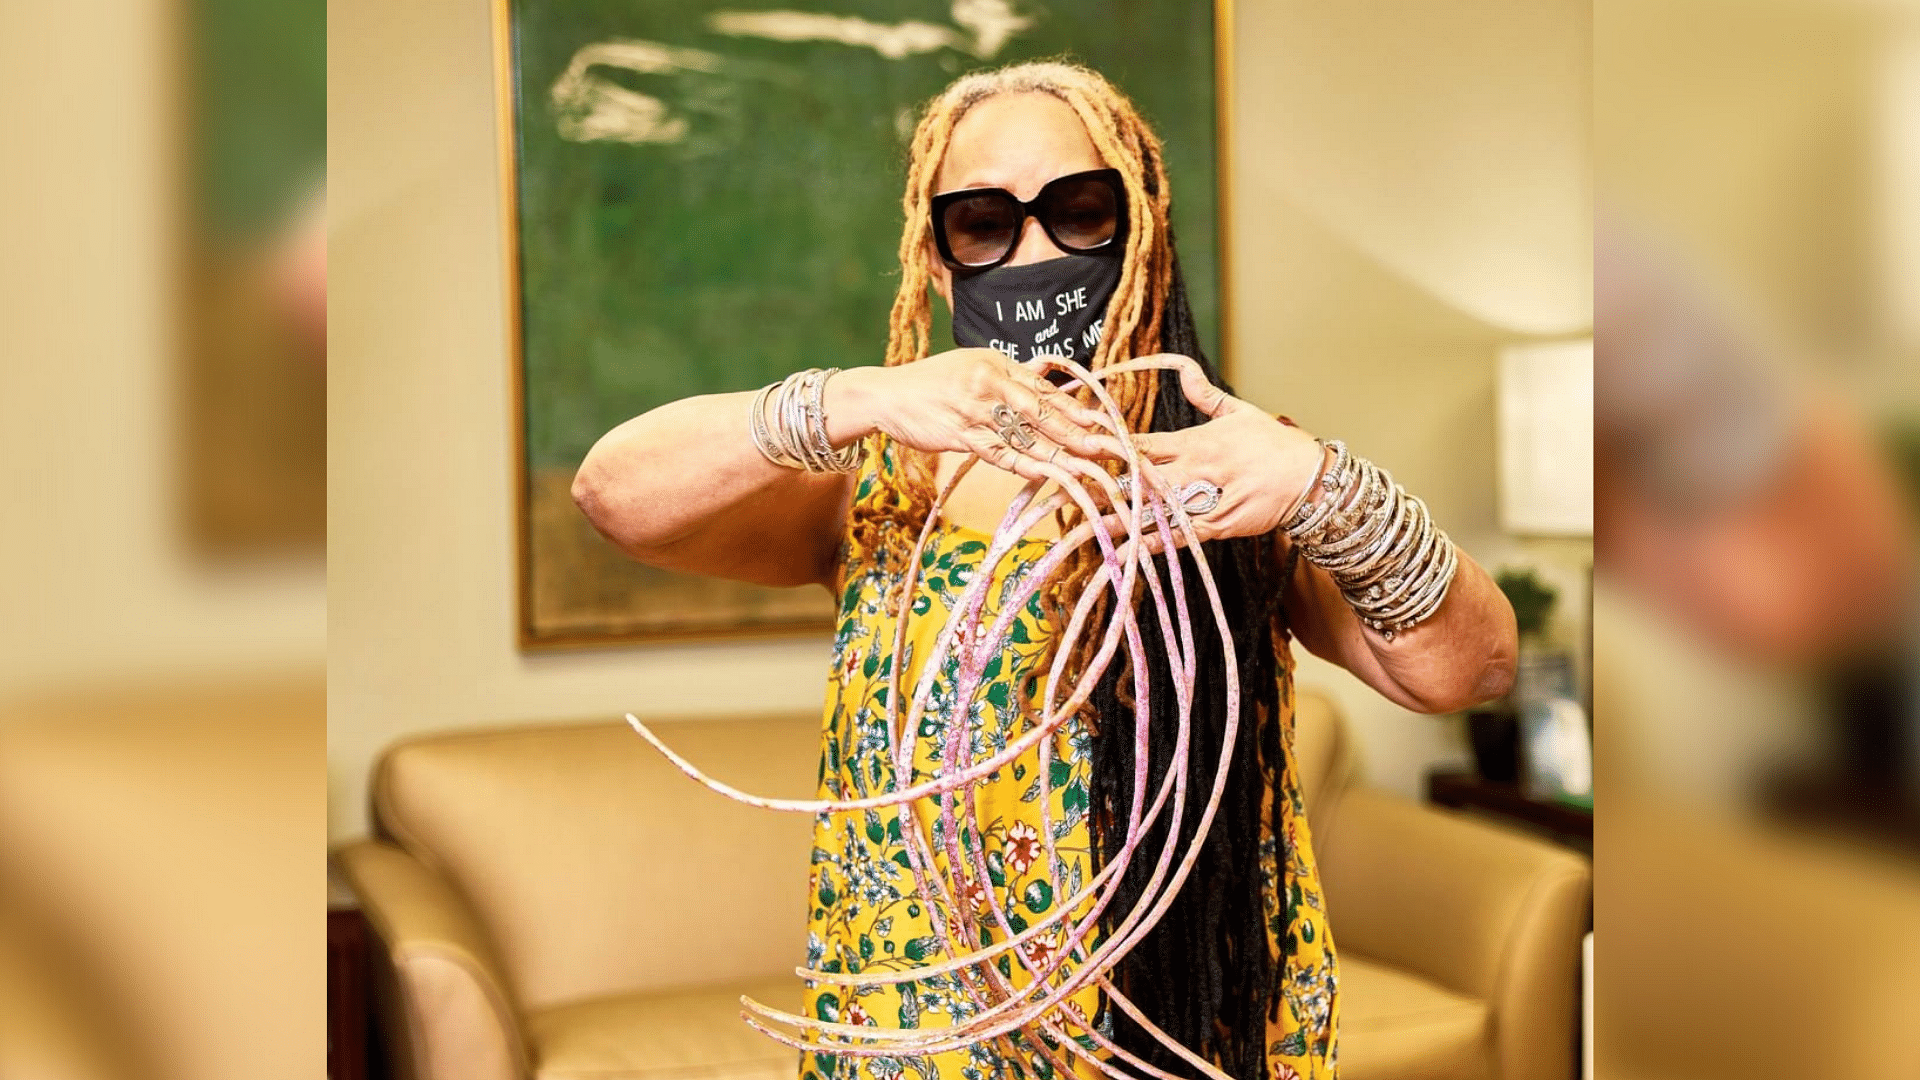 Longest acrylic nails? Tampa's Odilon Ozare sets Guinness record